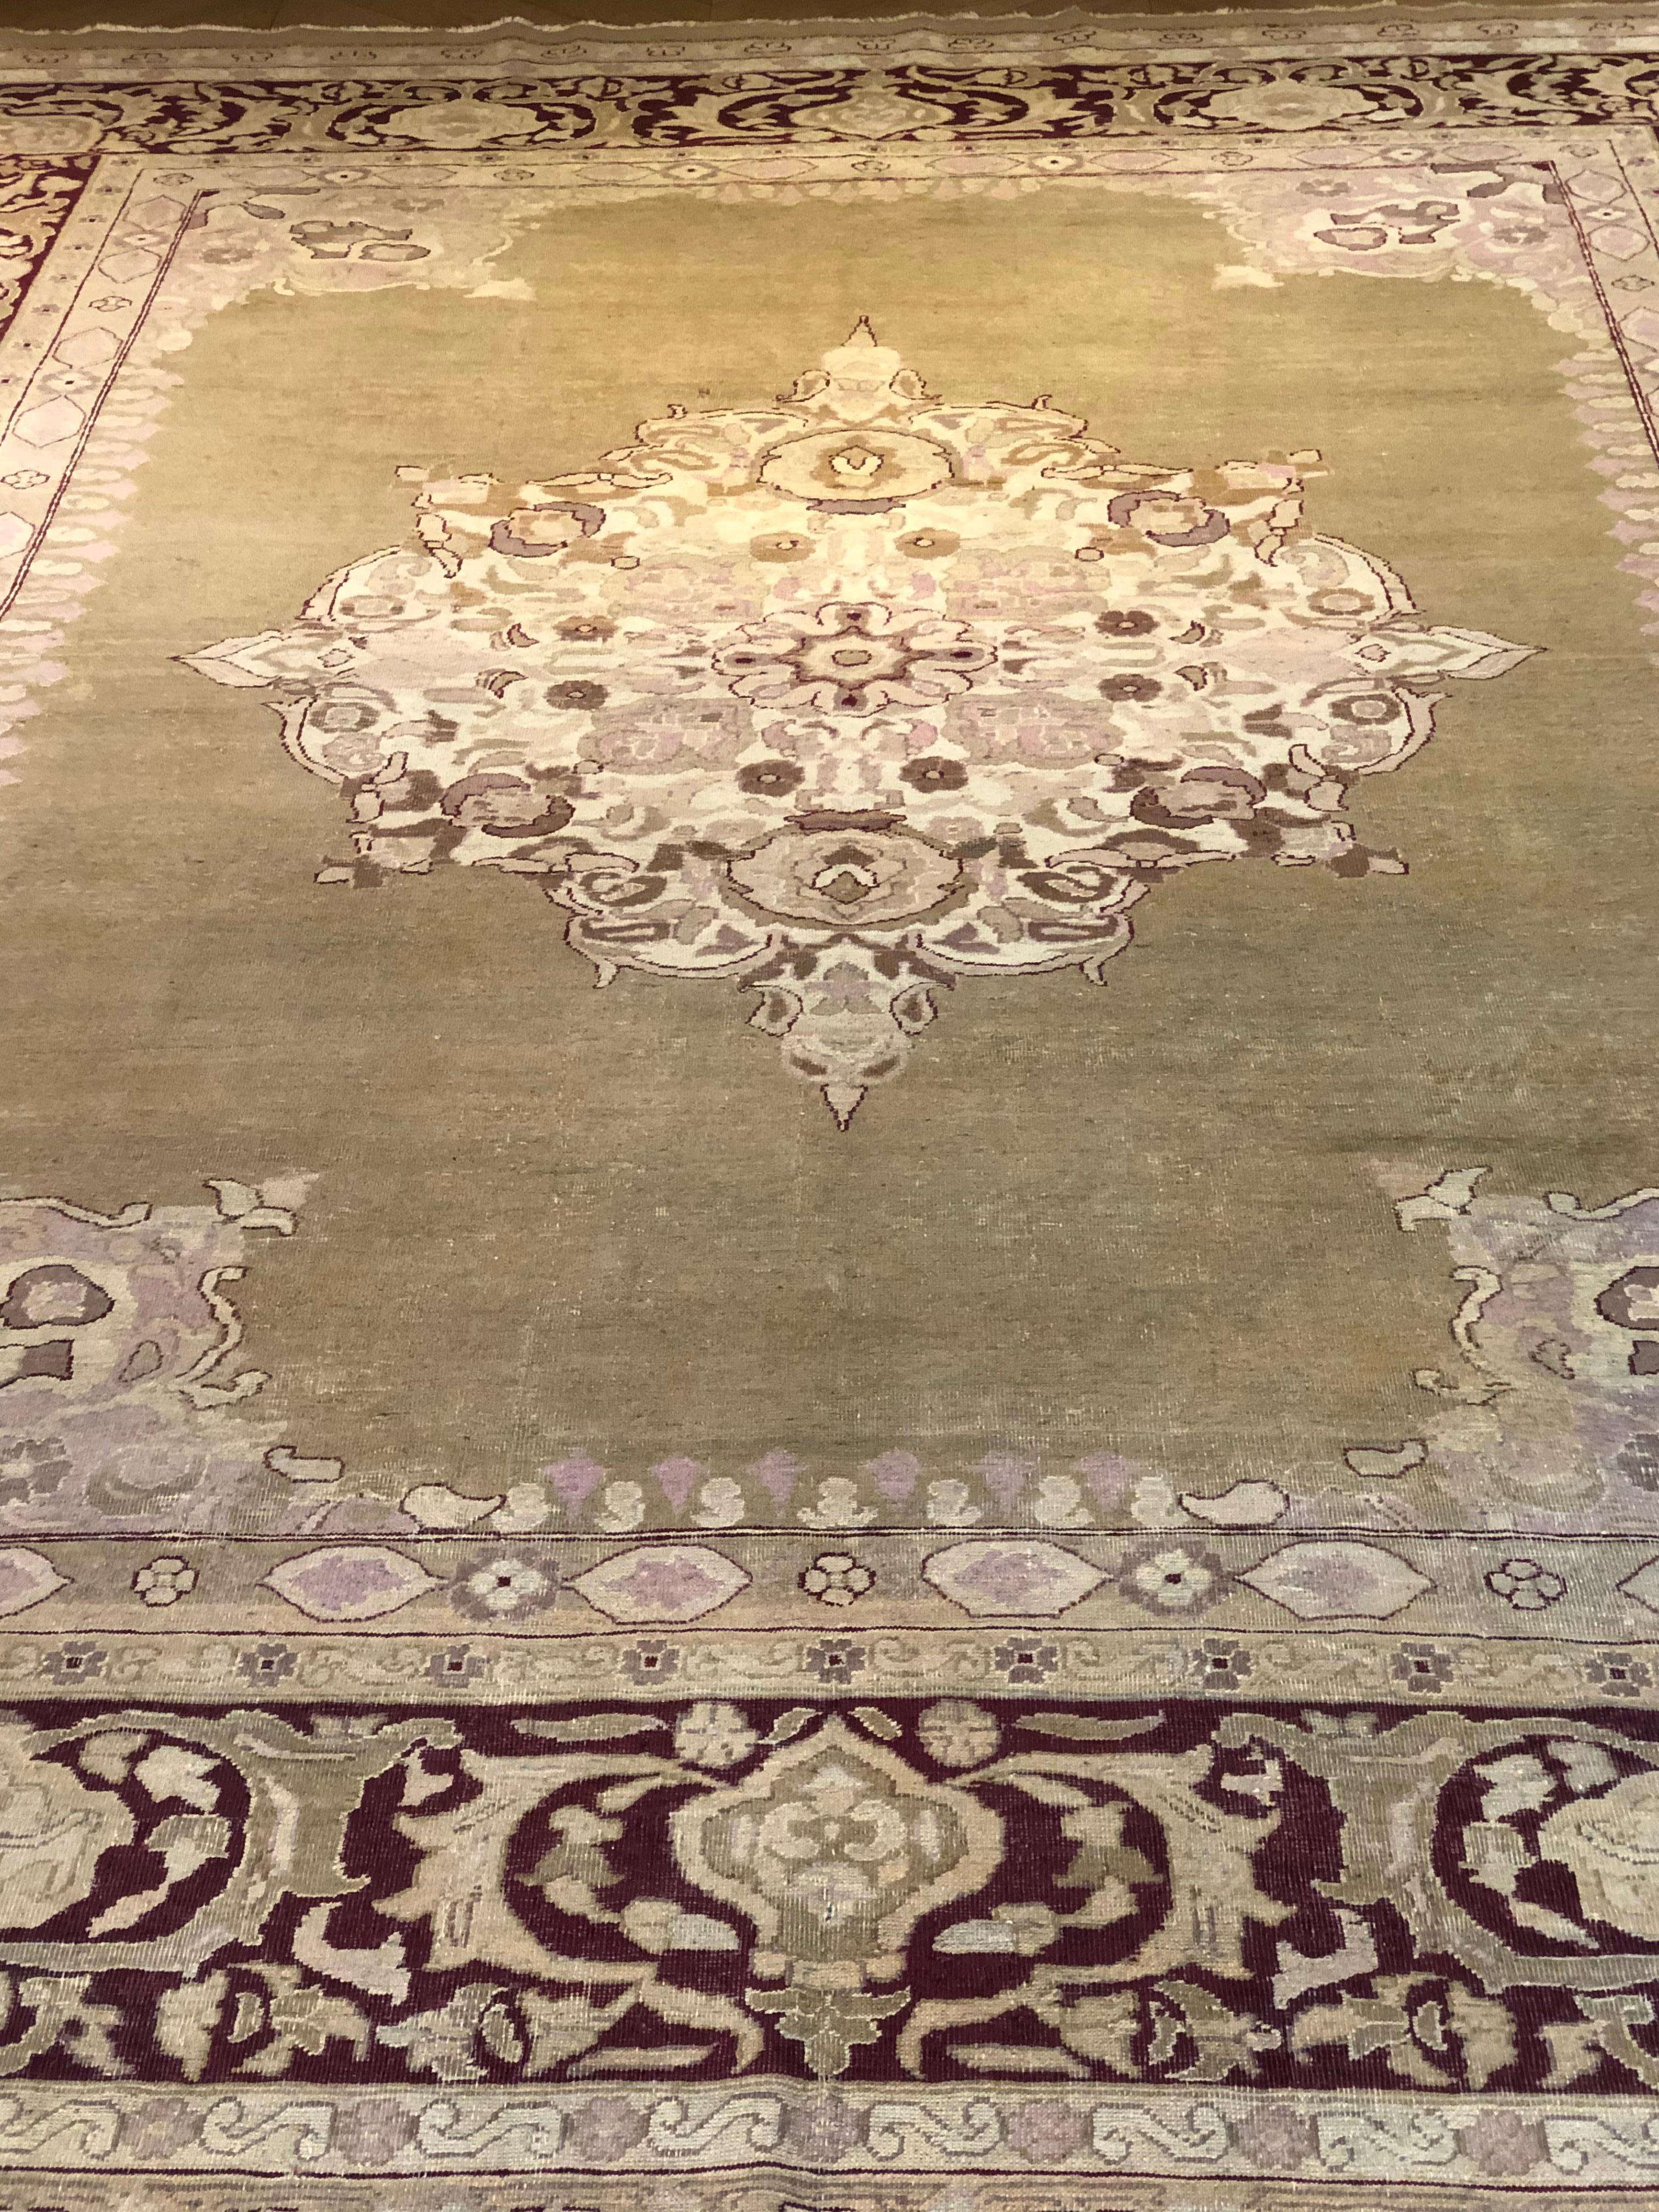 Indian production carpet with pastel tones. A large beige medallion rests in the green lemon-coloured field. The rich border has a purple-red background and is decorated with small sweaters that recall the central one. Measures: 340 x 270 cm
This